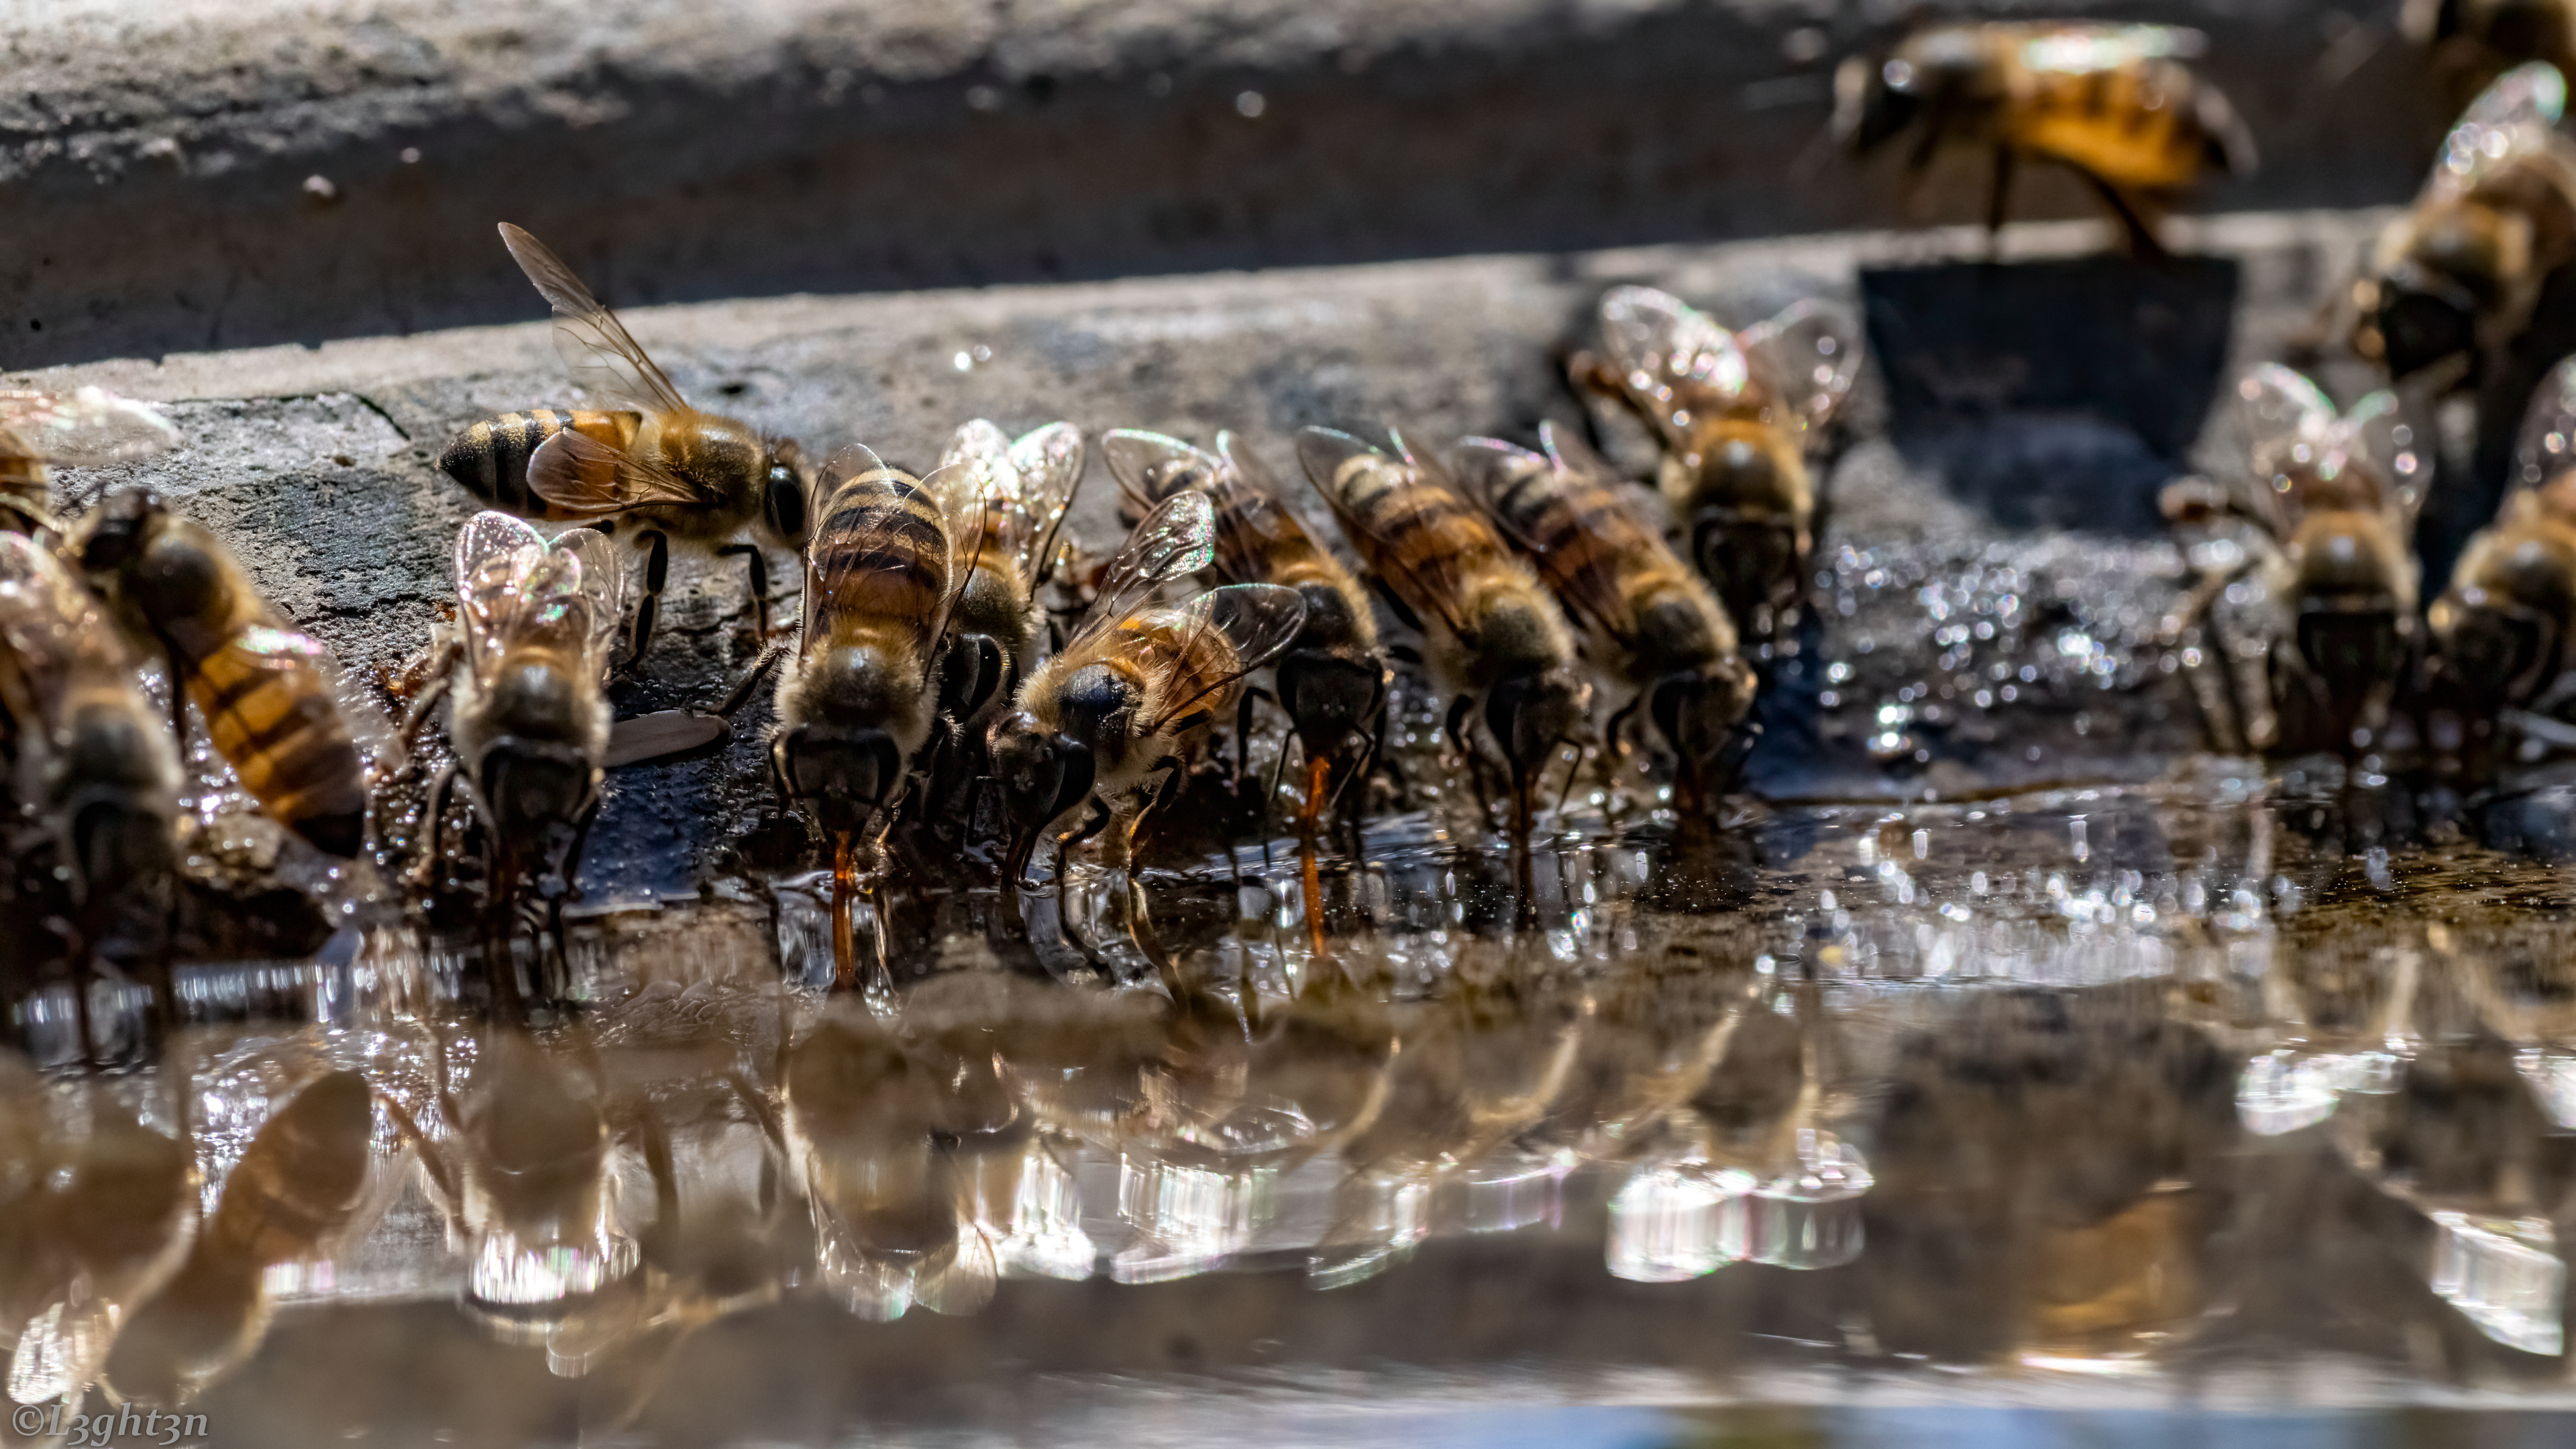 General 3840x2160 water photography bees reflection insect animals drinking closeup macro